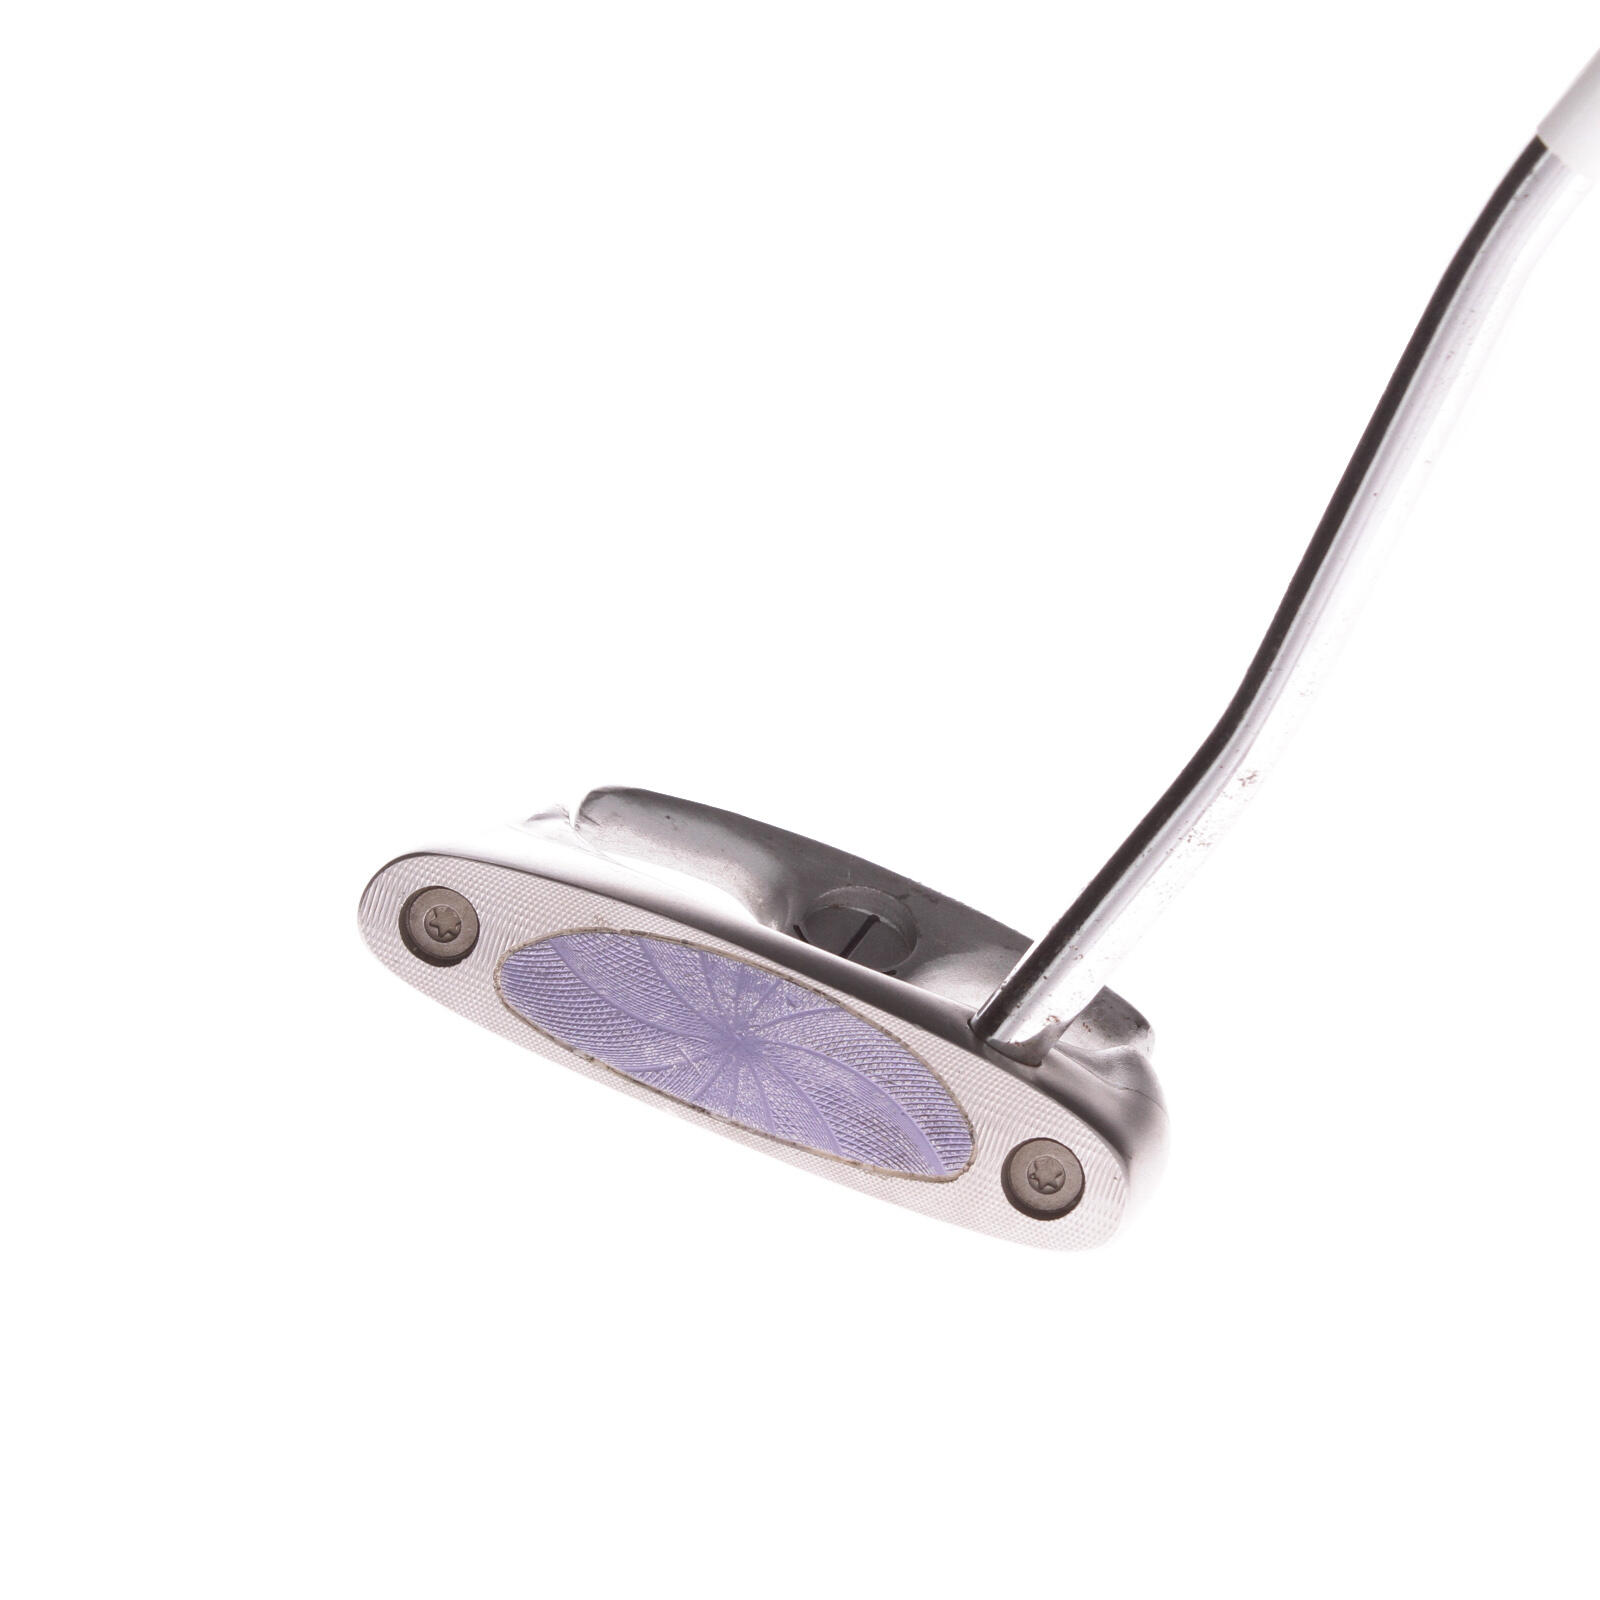 USED - Falcon Exocet Putter 34 Inches Length Steel Shaft Right Handed - GRADE B 3/6